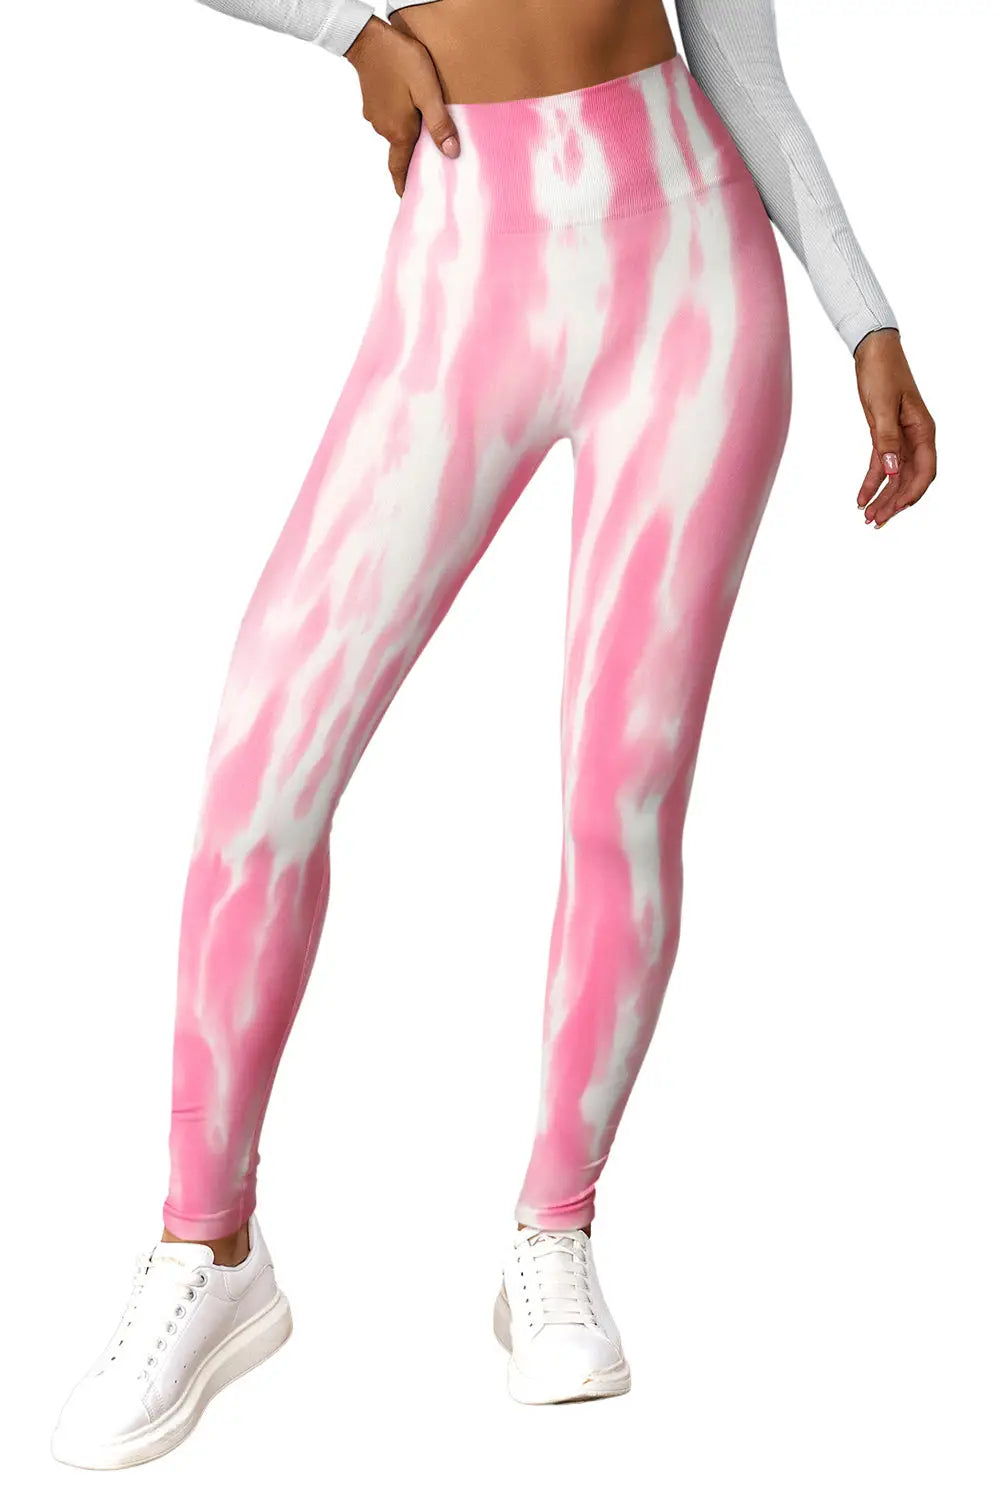 Pink Tie Dye Scrunched Active Pants - Activewear dye,pink